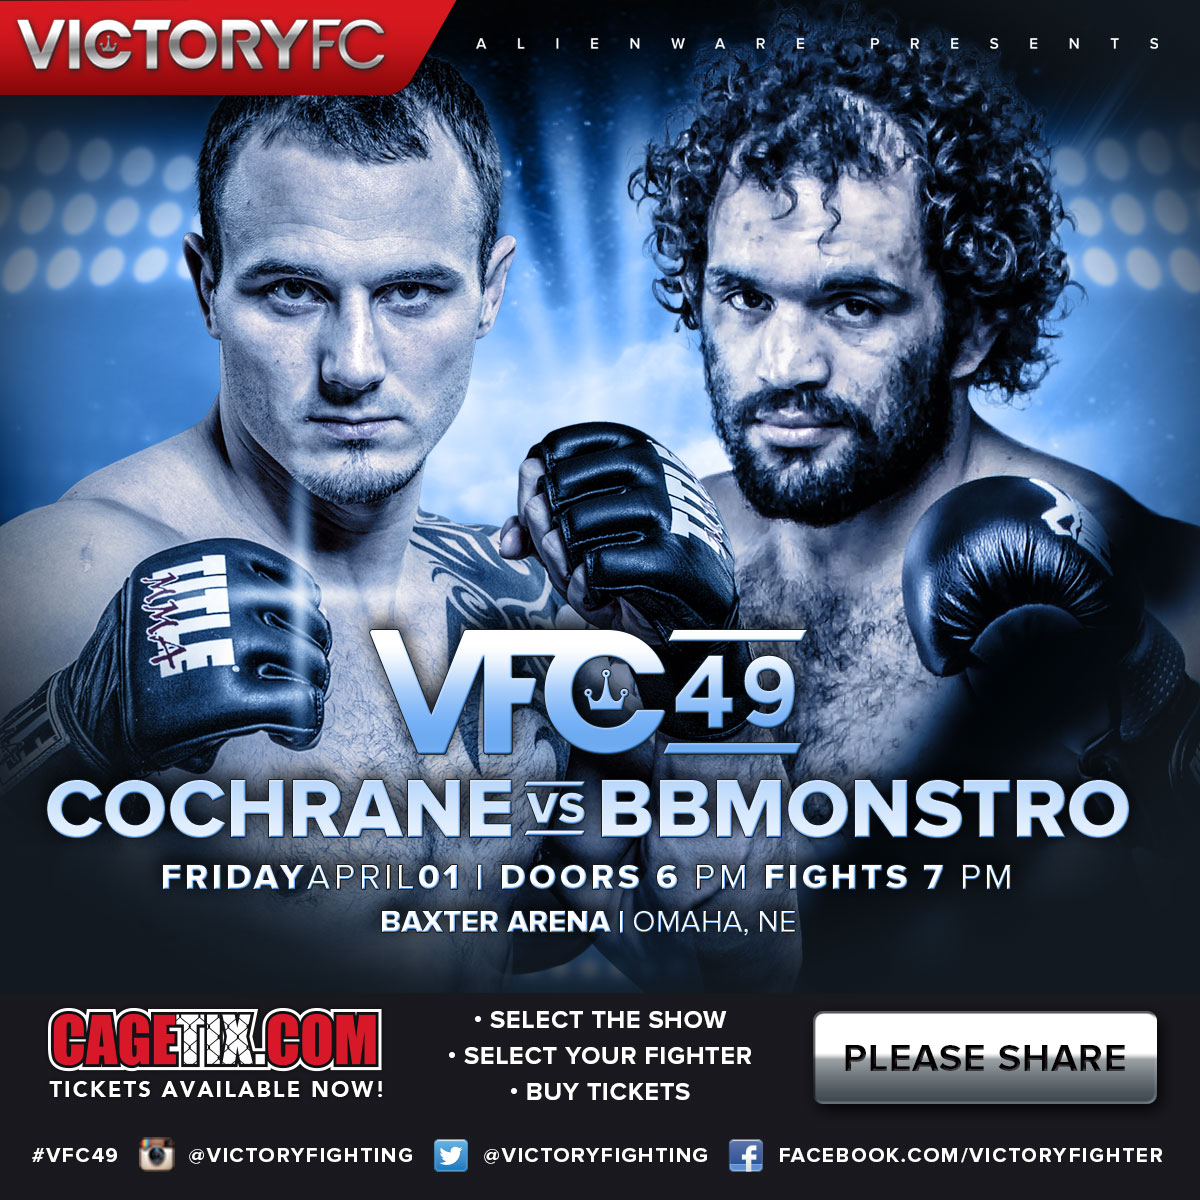 Poster do Victory FC 49 (Foto: Facebook/Victory FC)